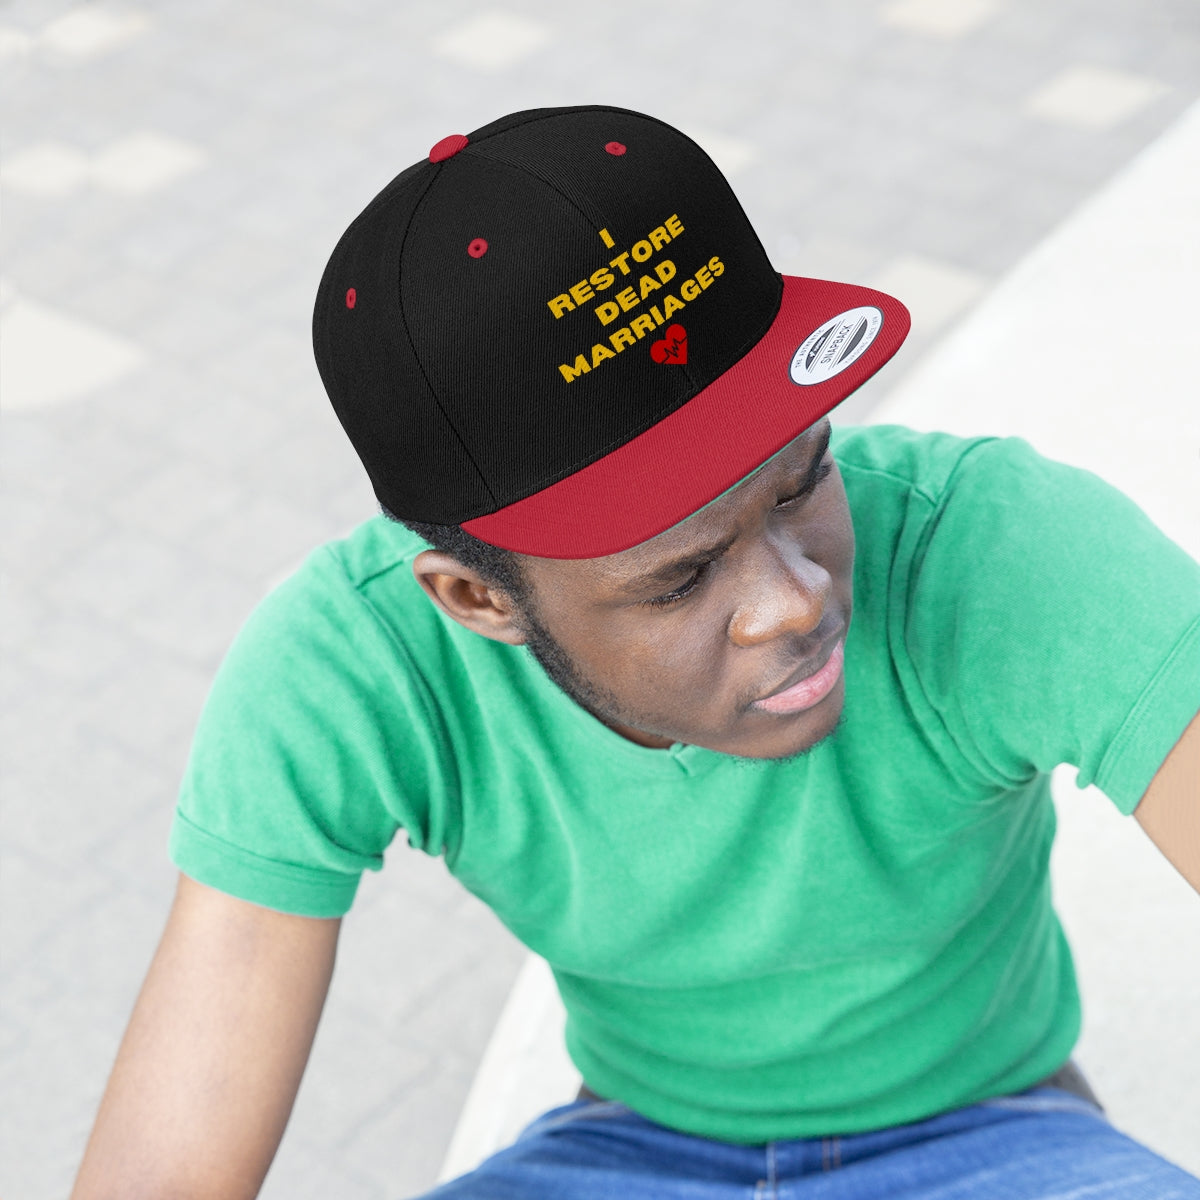 "I Restore Dead Marriages" Flat Bill Hat (Black/Red, Black/Gold, & Black available)